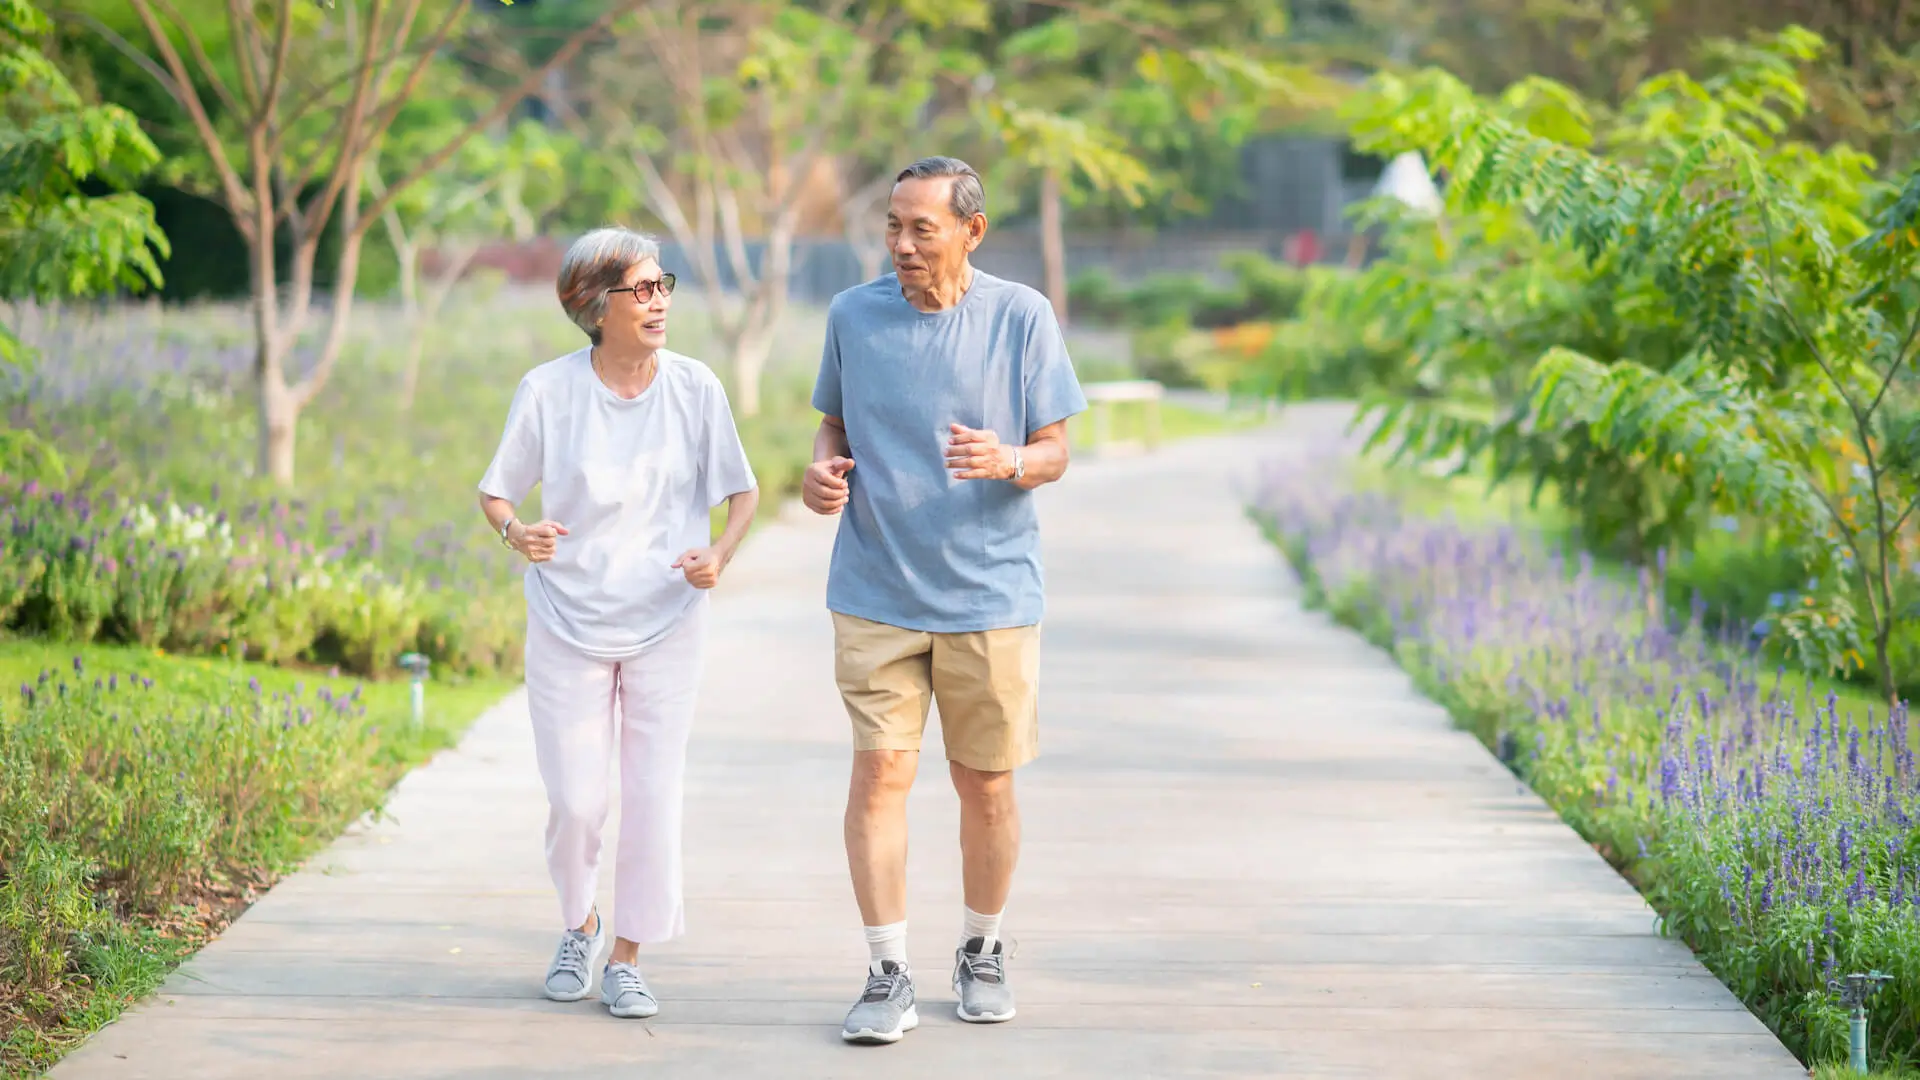 Asian senior retired couple jogging or exercise in the park. Healthy elderly people concept